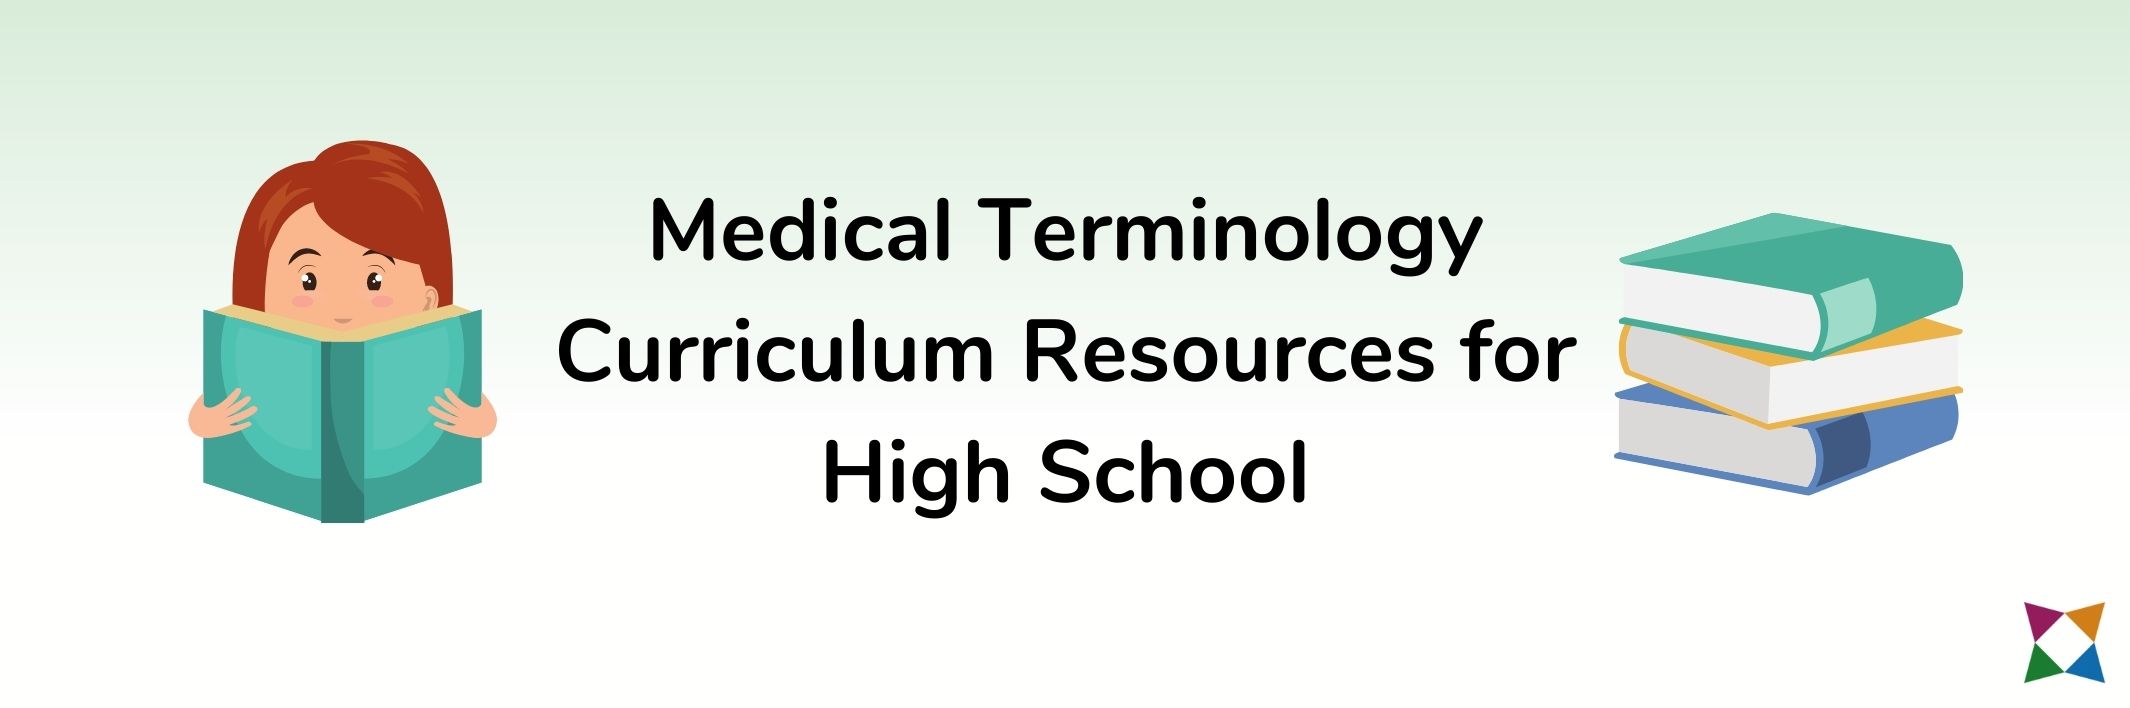 6 Best Medical Terminology Curriculum Resources for High School